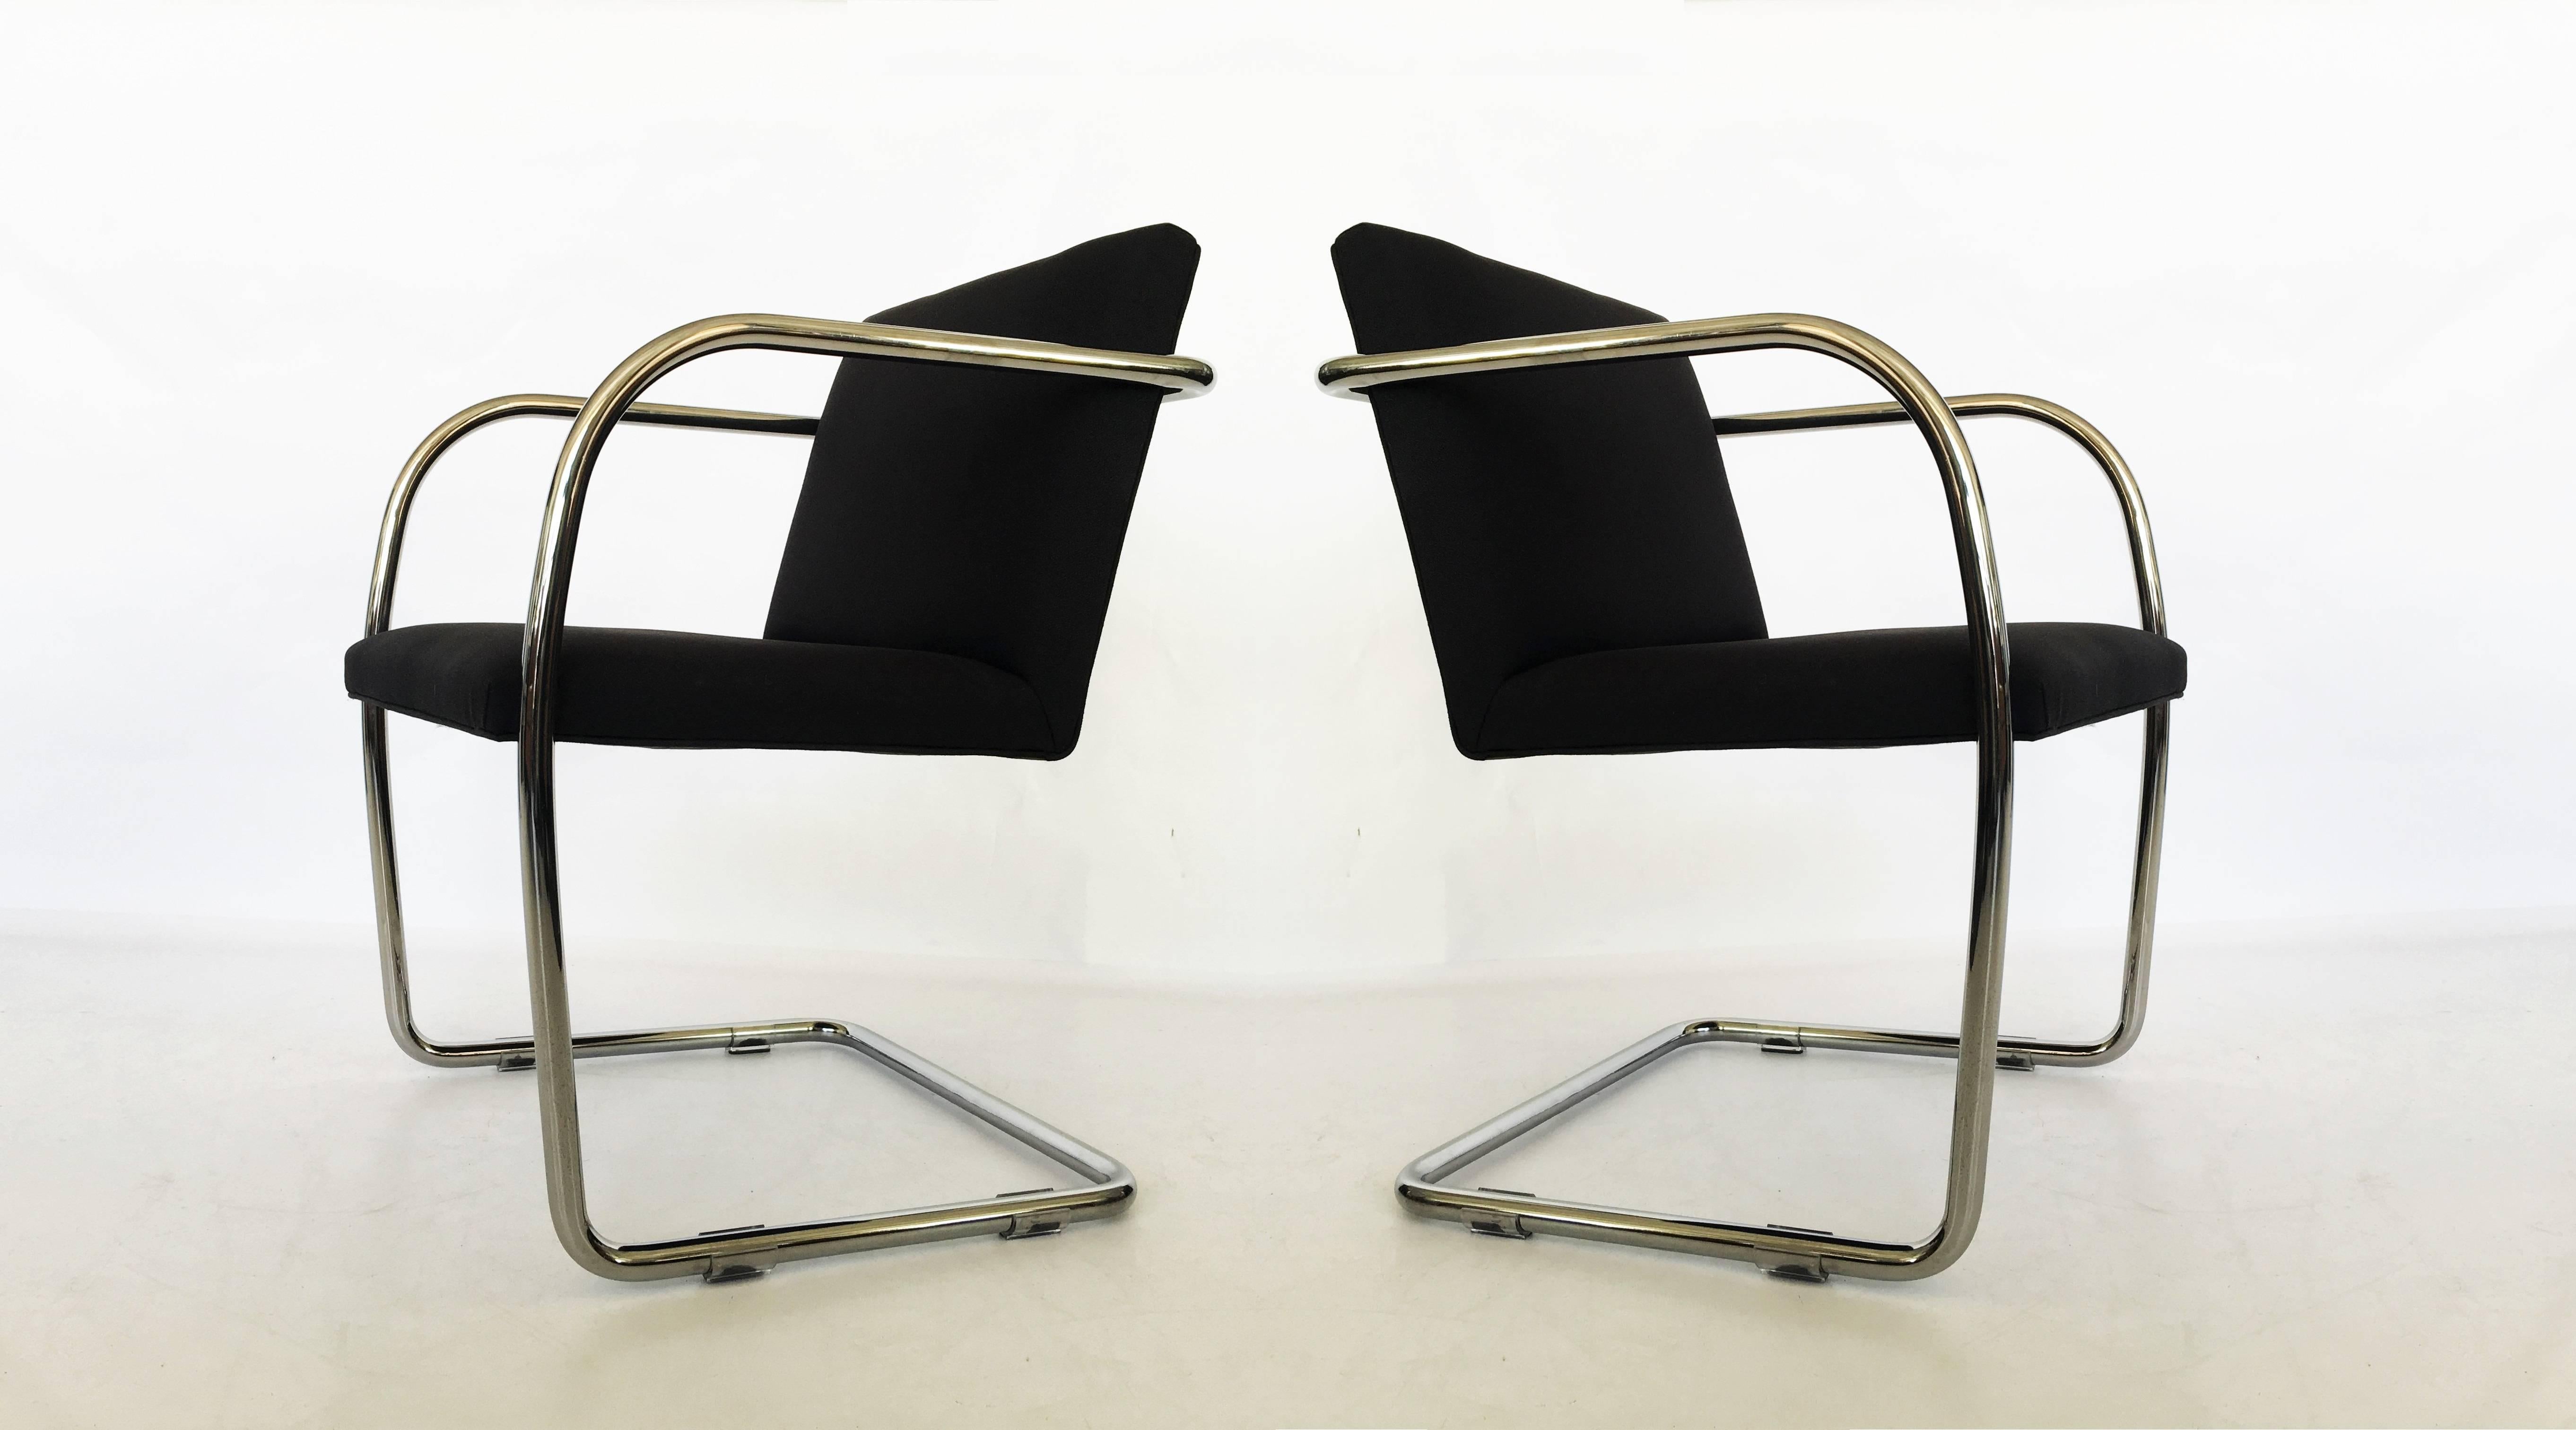 Pair of great Mies van der Rohe style Brno chairs made by Thonet.